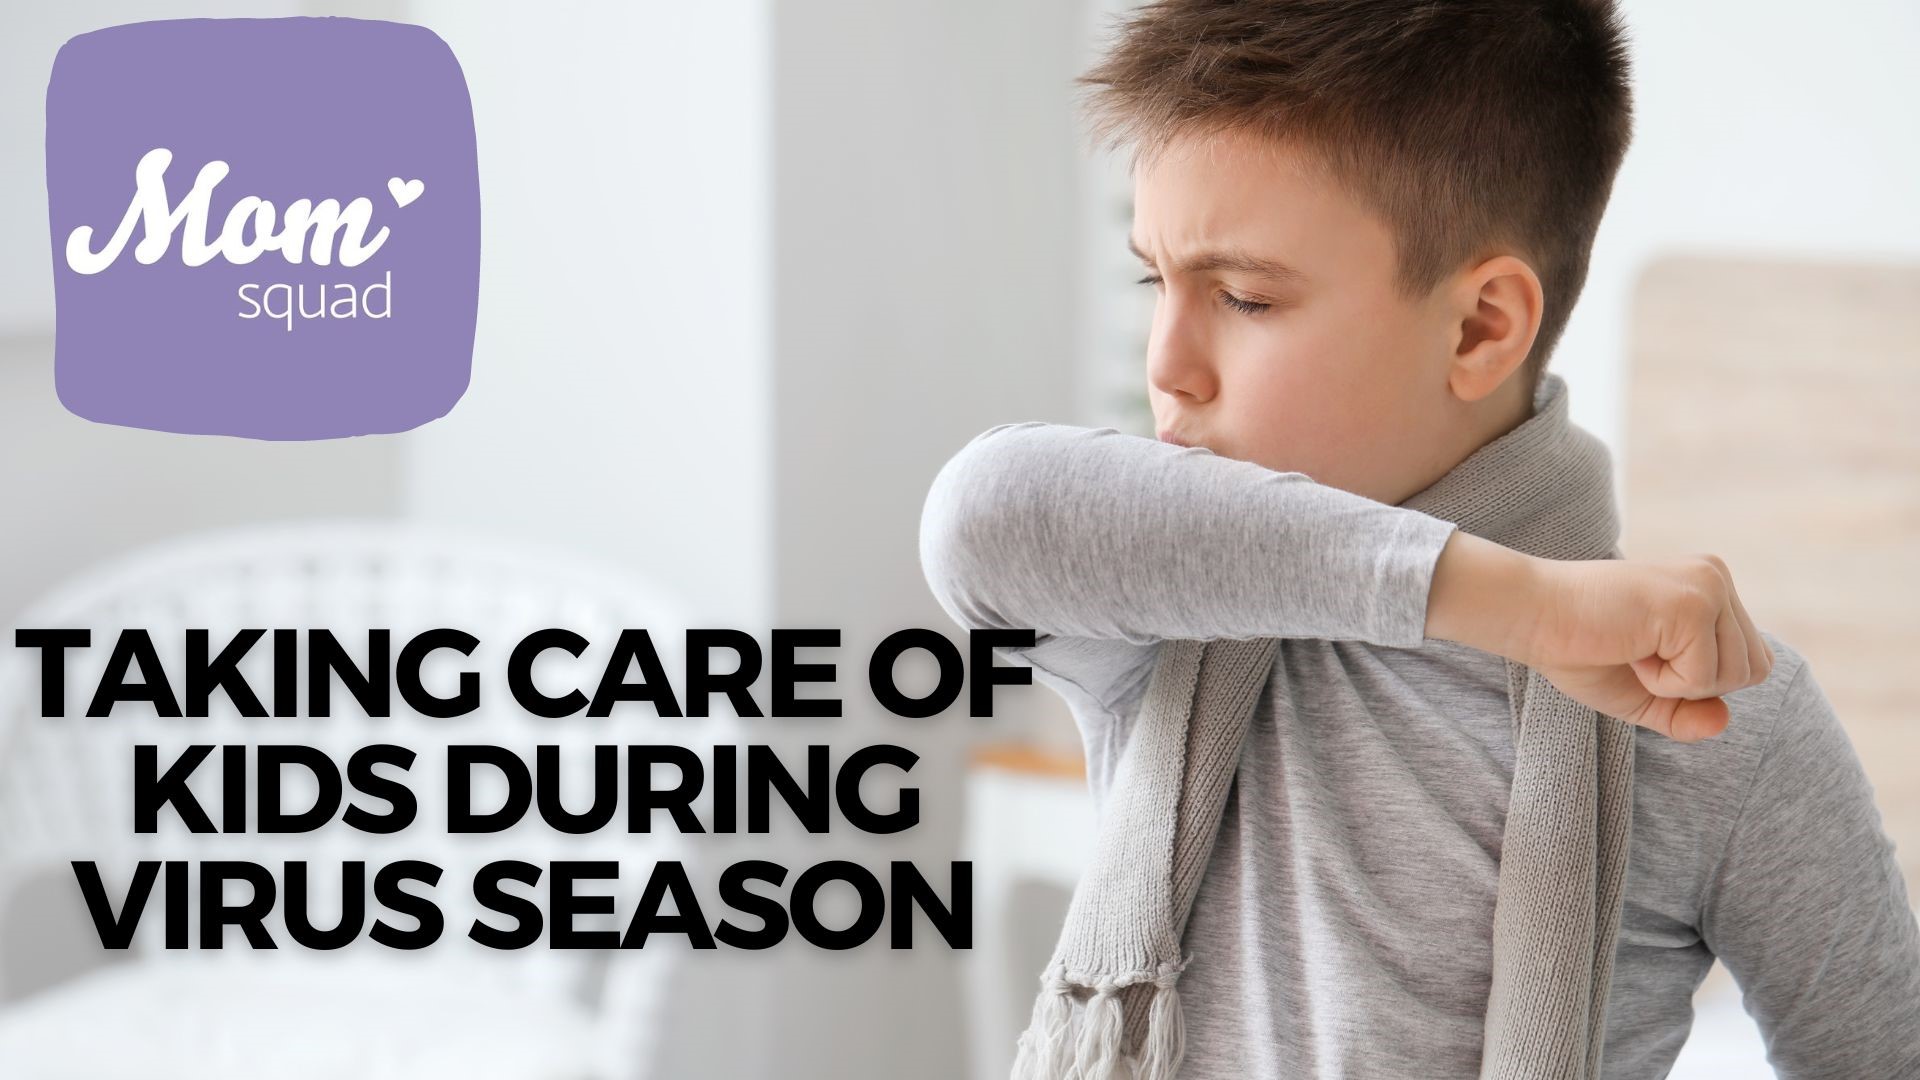 Maureen Kyle sits down with a pediatric specialist for tips on handling virus season. From what symptoms to watch for in kids to when to go to the doctor and more.